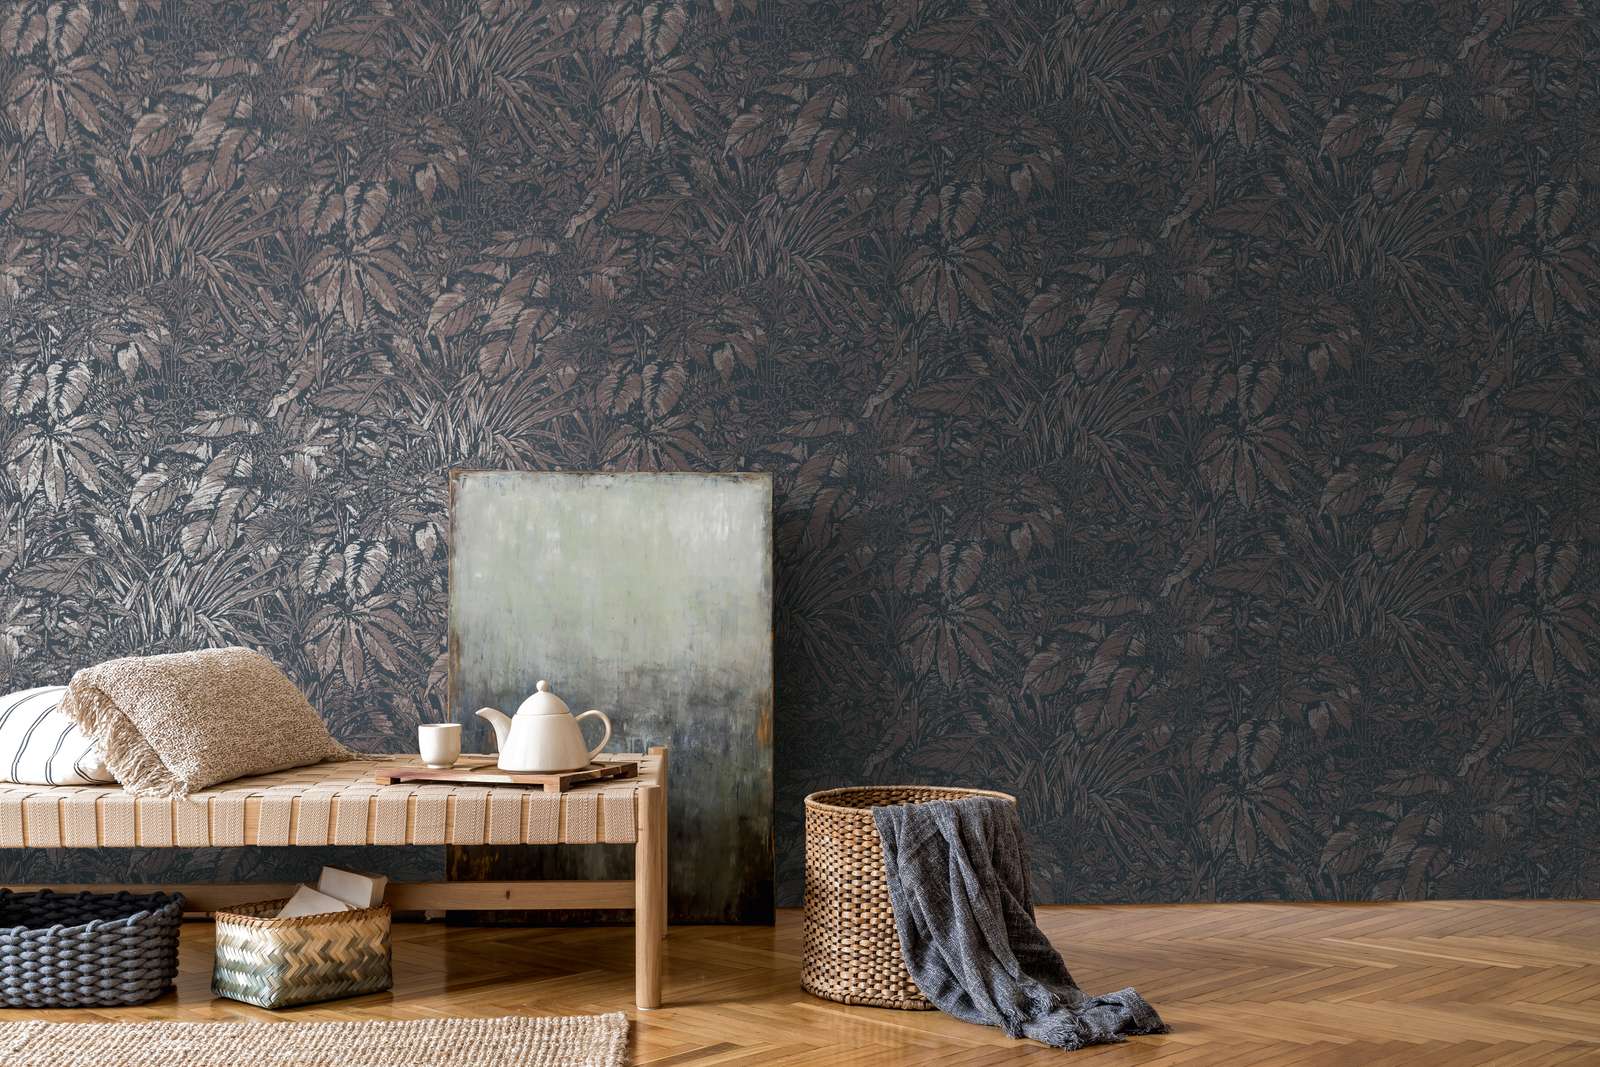             Jungle wallpaper light glossy with leaf pattern - brown, black, silver
        